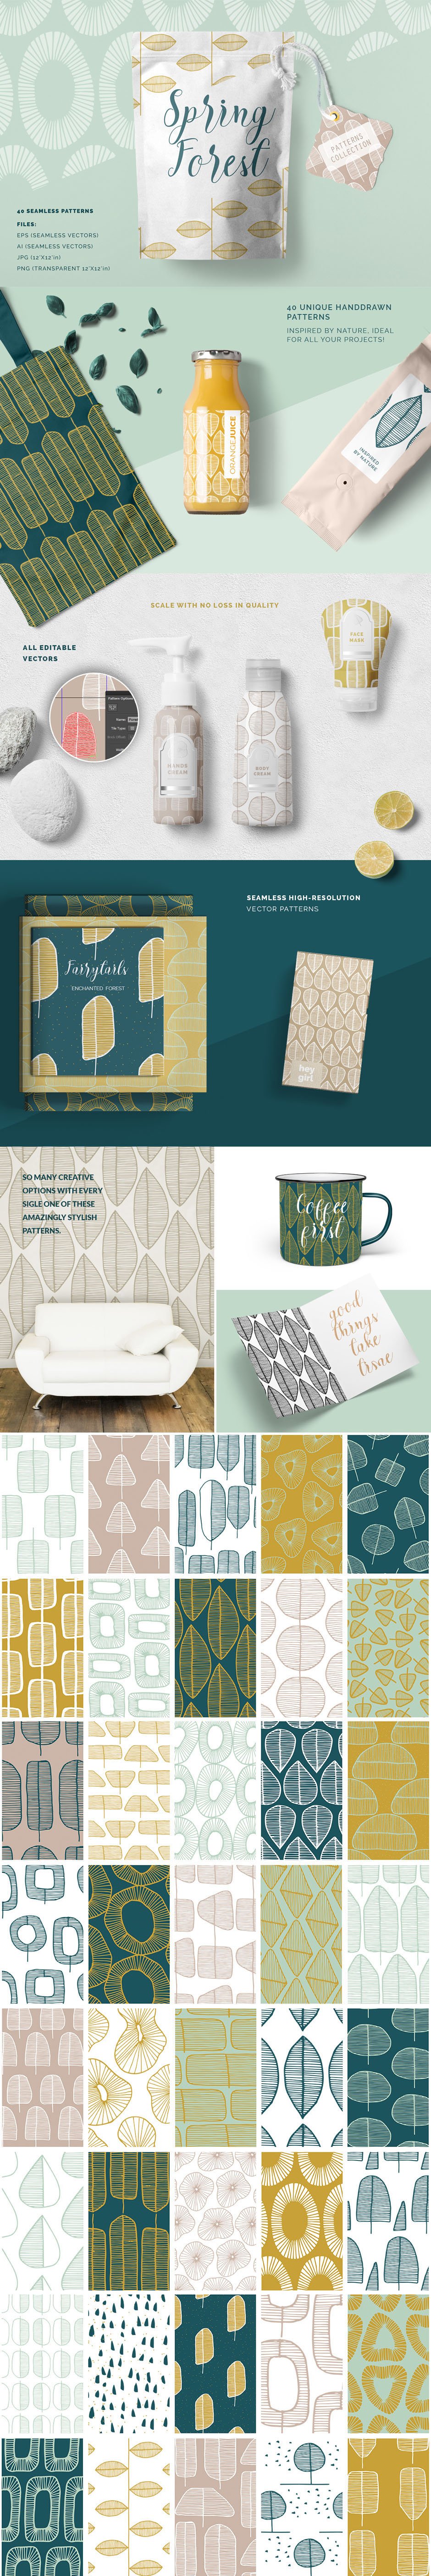 The Comprehensive Texture and Patterns Collection